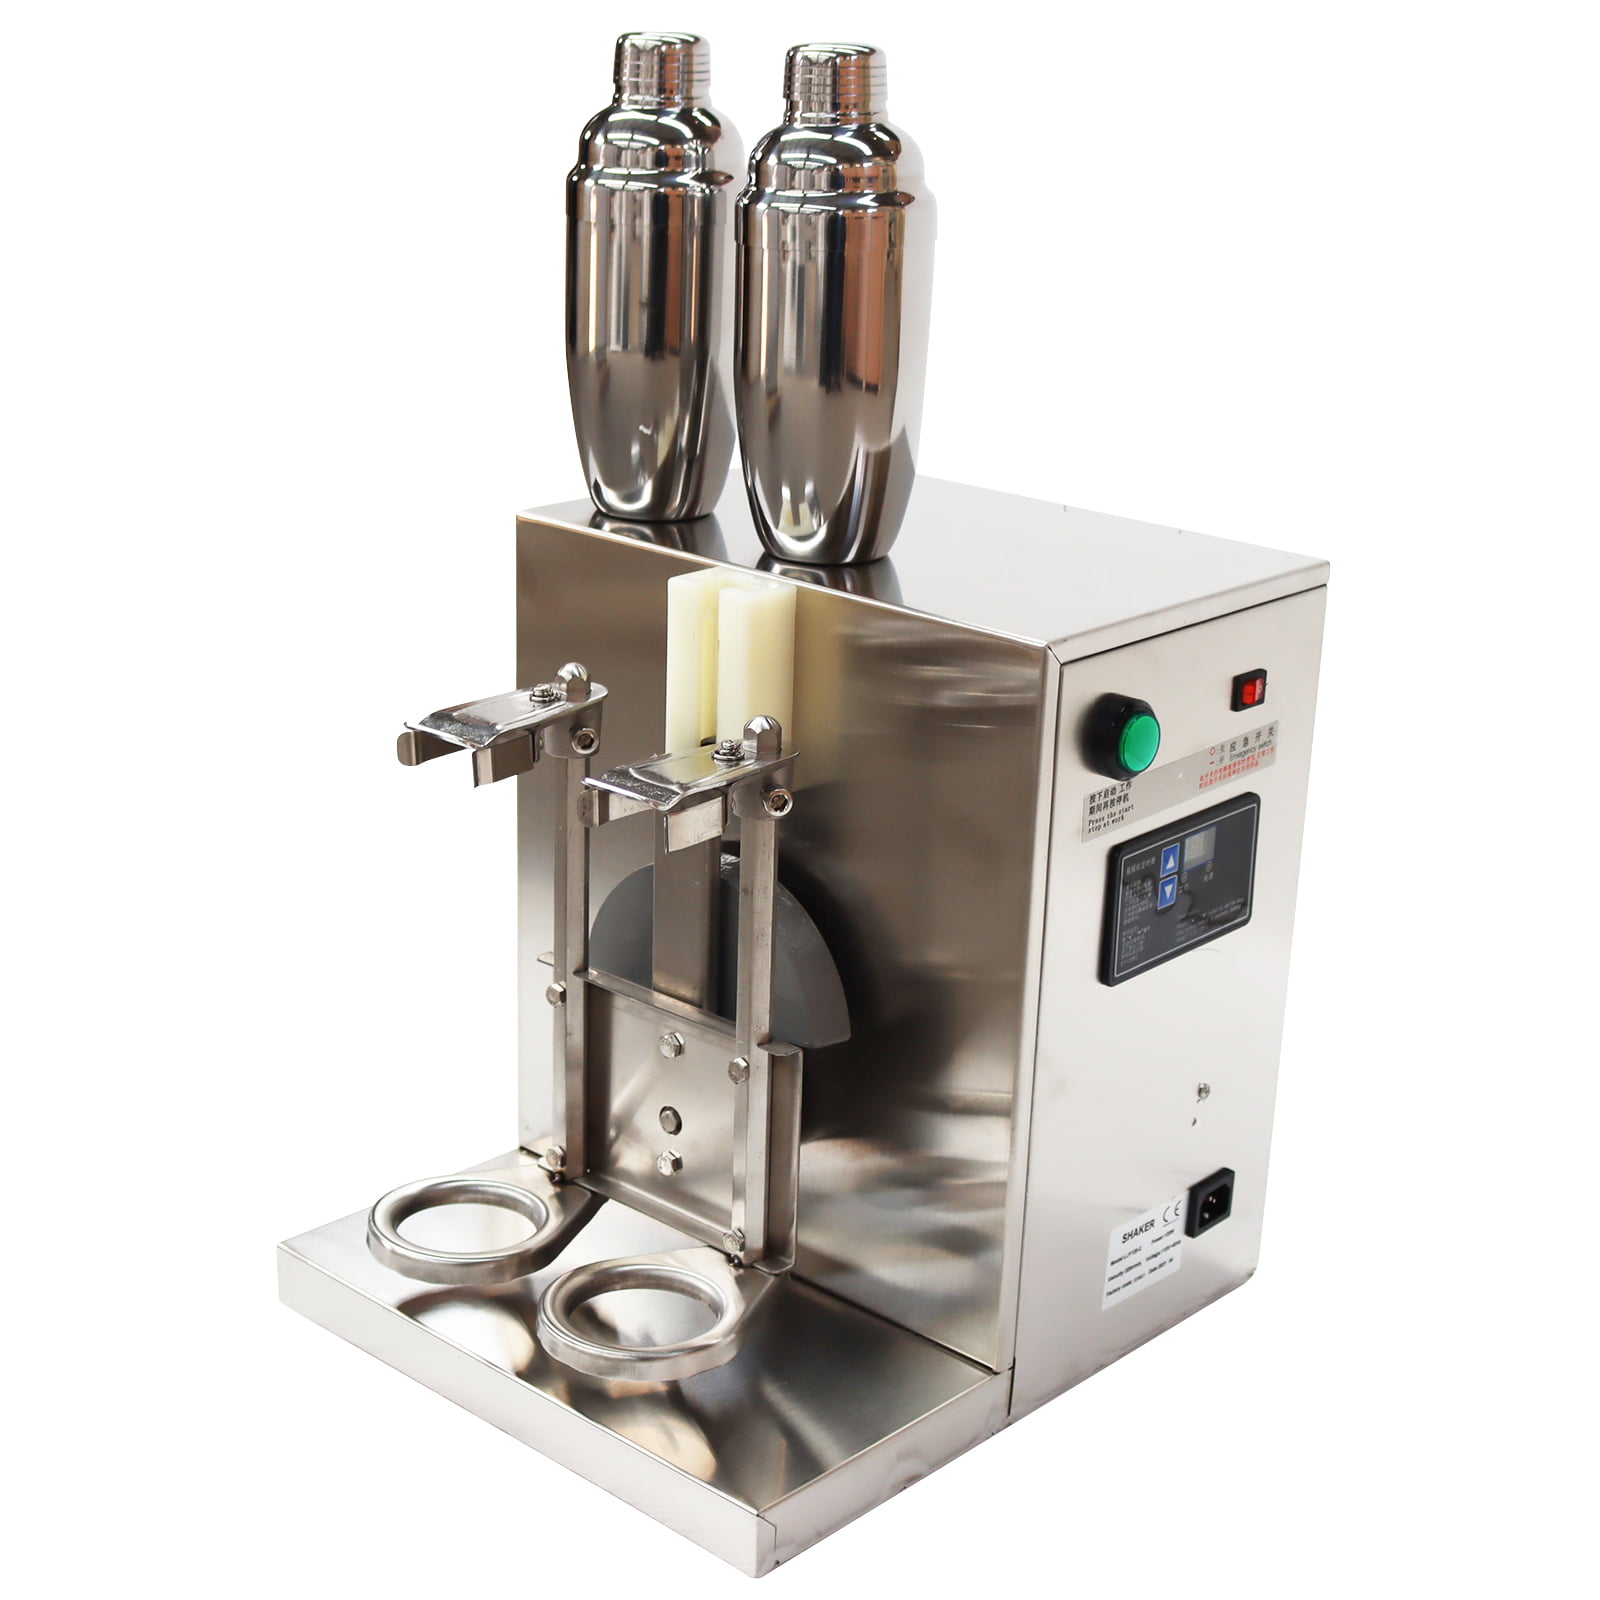  Electric Milk Tea Shaker Machine,120W Bubble Boba Milk Tea  Shaker,360° Automatic Stainless Steel Drink Mixer,Double-Cup Auto for  Restaurant Coffee Shop Food and Beverage Stores,400RPM: Home & Kitchen